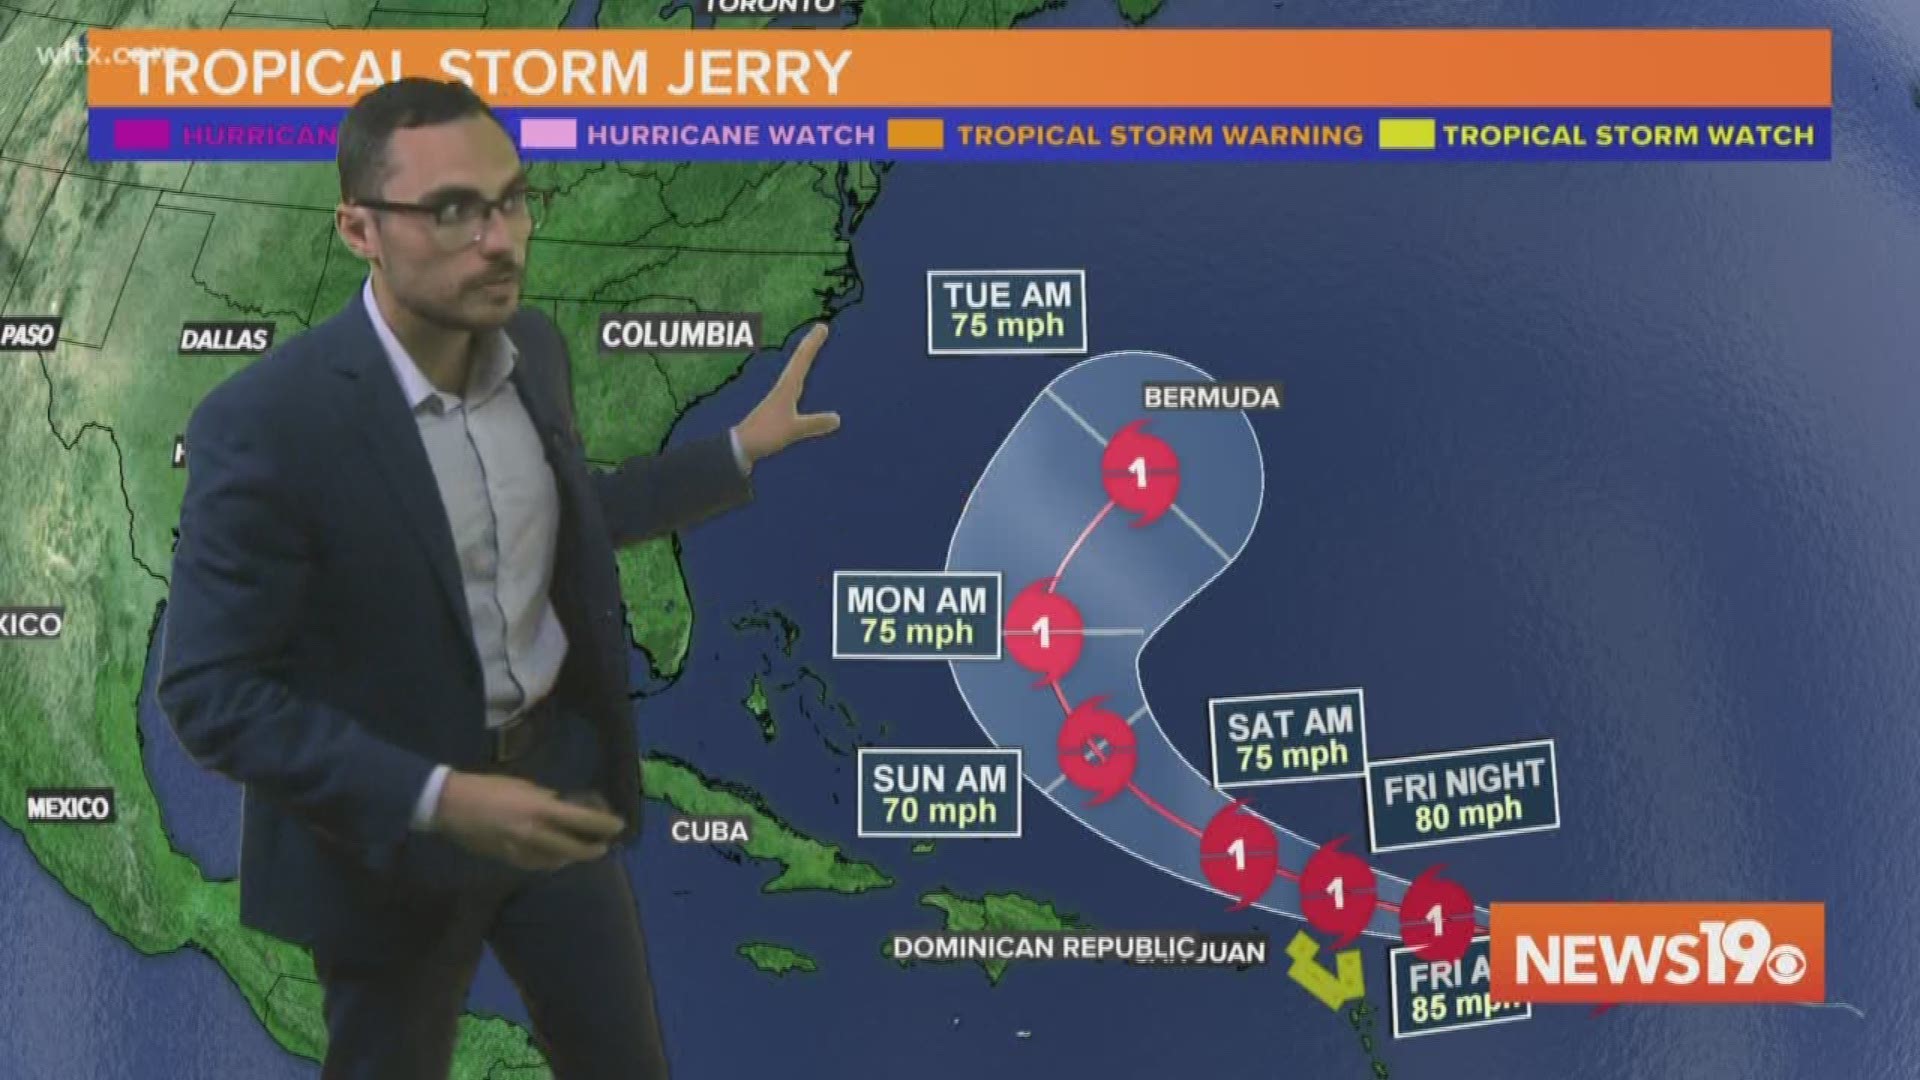 Hurricane Jerry is now a hurricane, and could cause problems for the tropics.